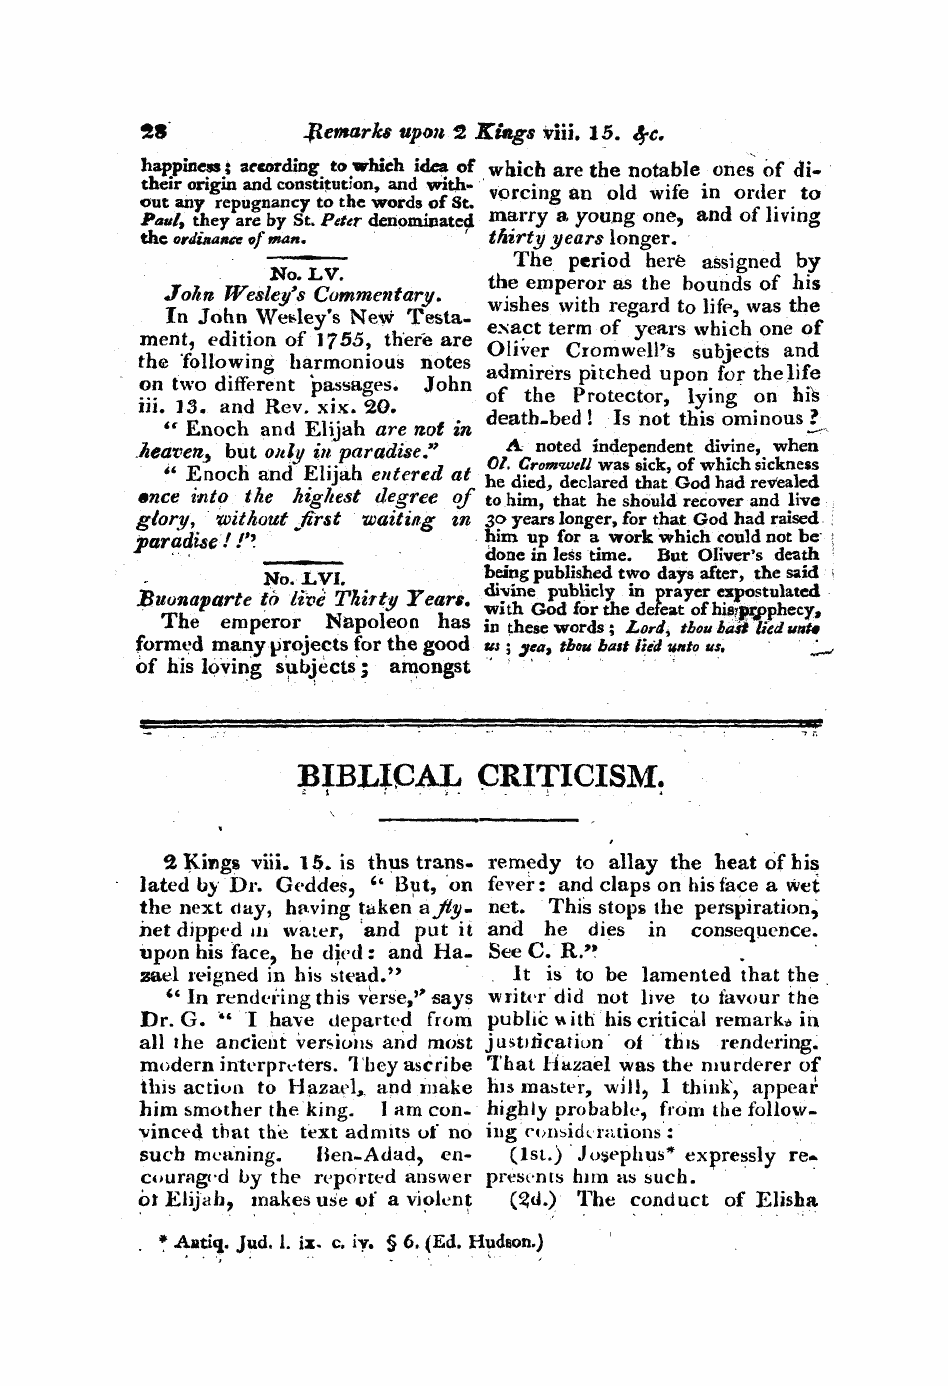 Monthly Repository (1806-1838) and Unitarian Chronicle (1832-1833): F Y, 1st edition: 28